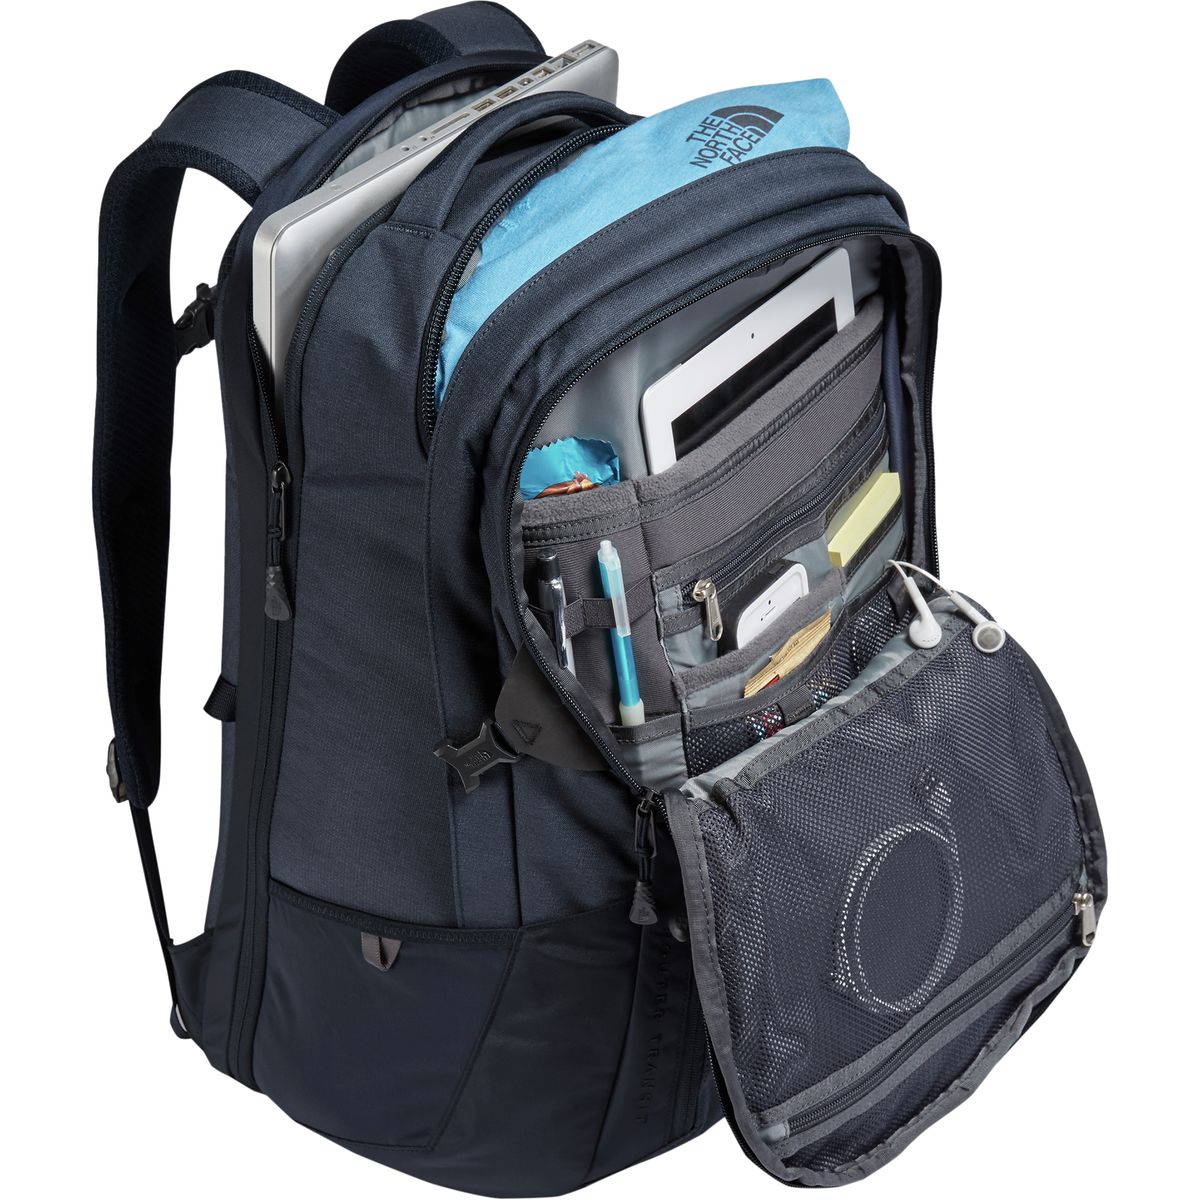 The North Face Router Transit 41L Backpack - Accessories